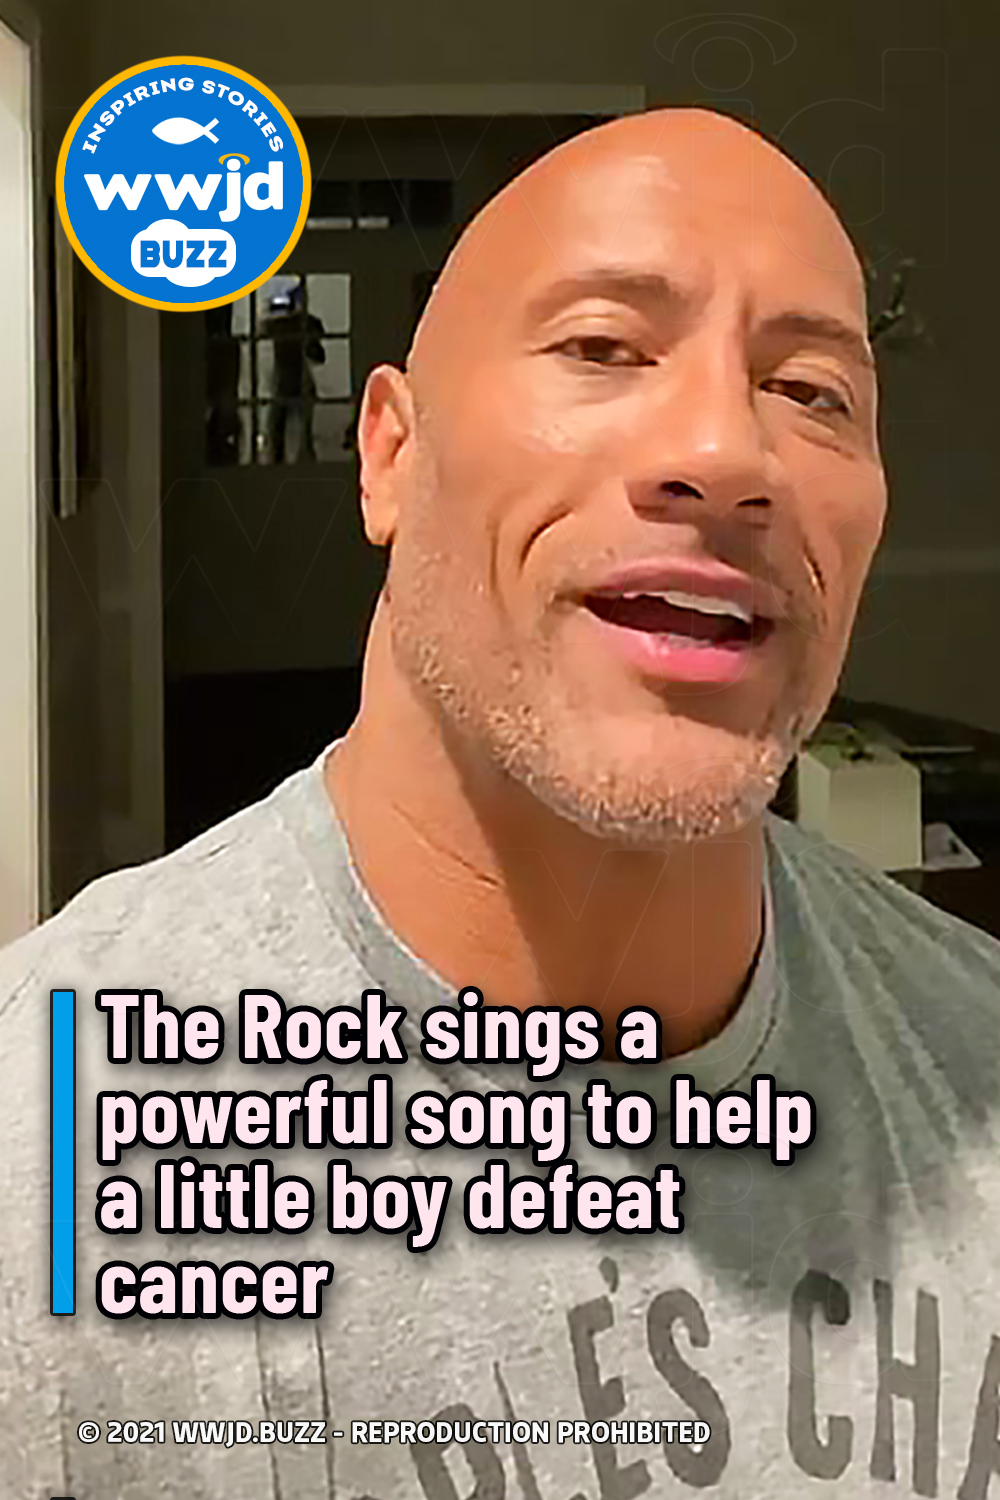 The Rock sings a powerful song to help a little boy defeat cancer